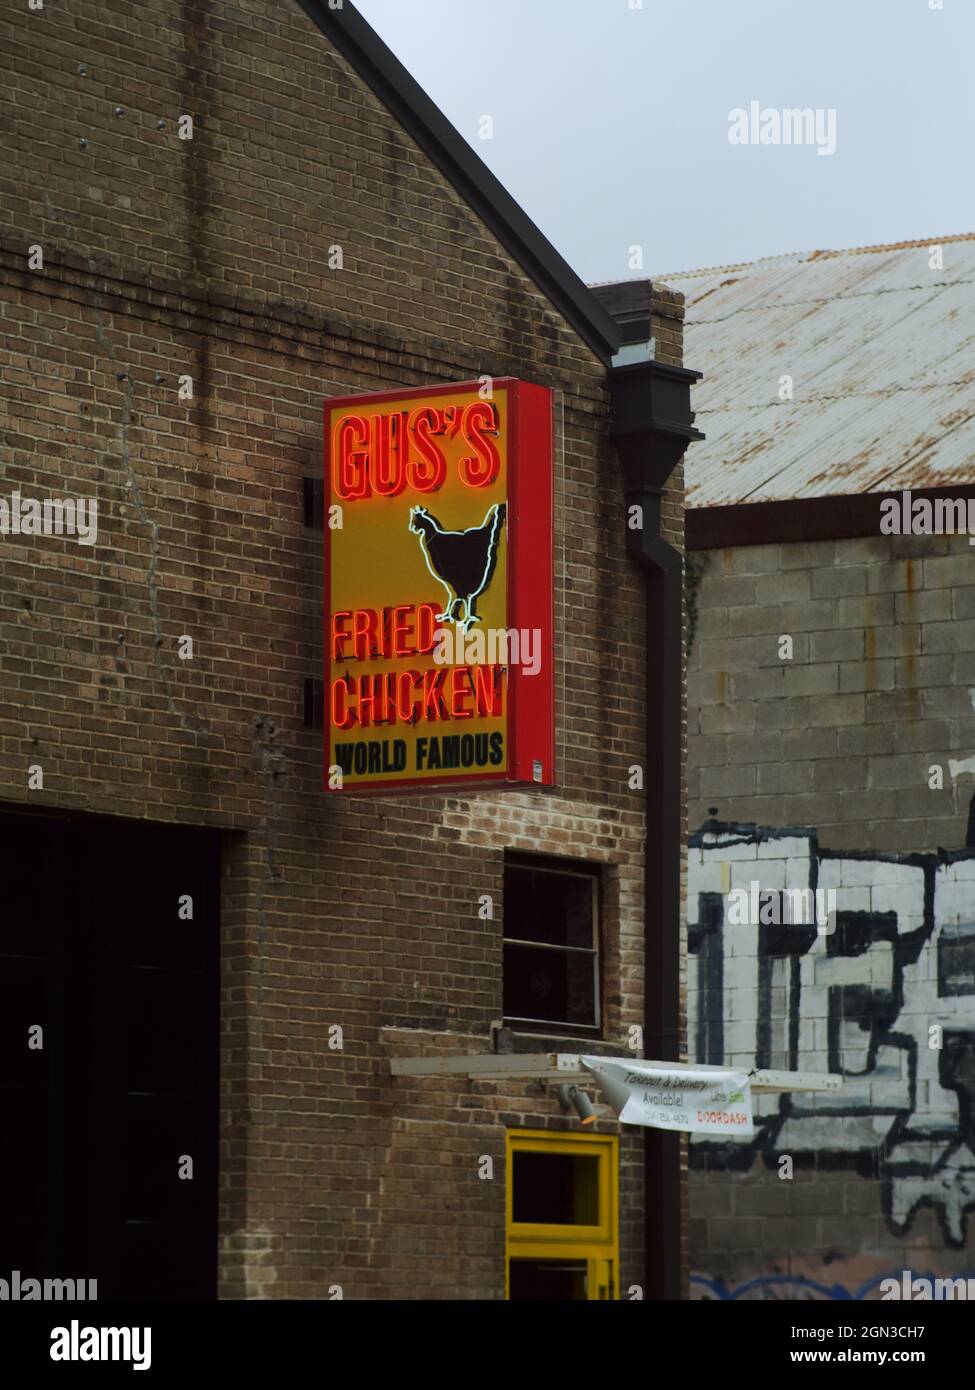 LOUISIANA, UNITED STATES - May 21, 2021: A restaurant sign of Gus’s World Famous Fried Chicken on a brick wall in New Orleans Stock Photo